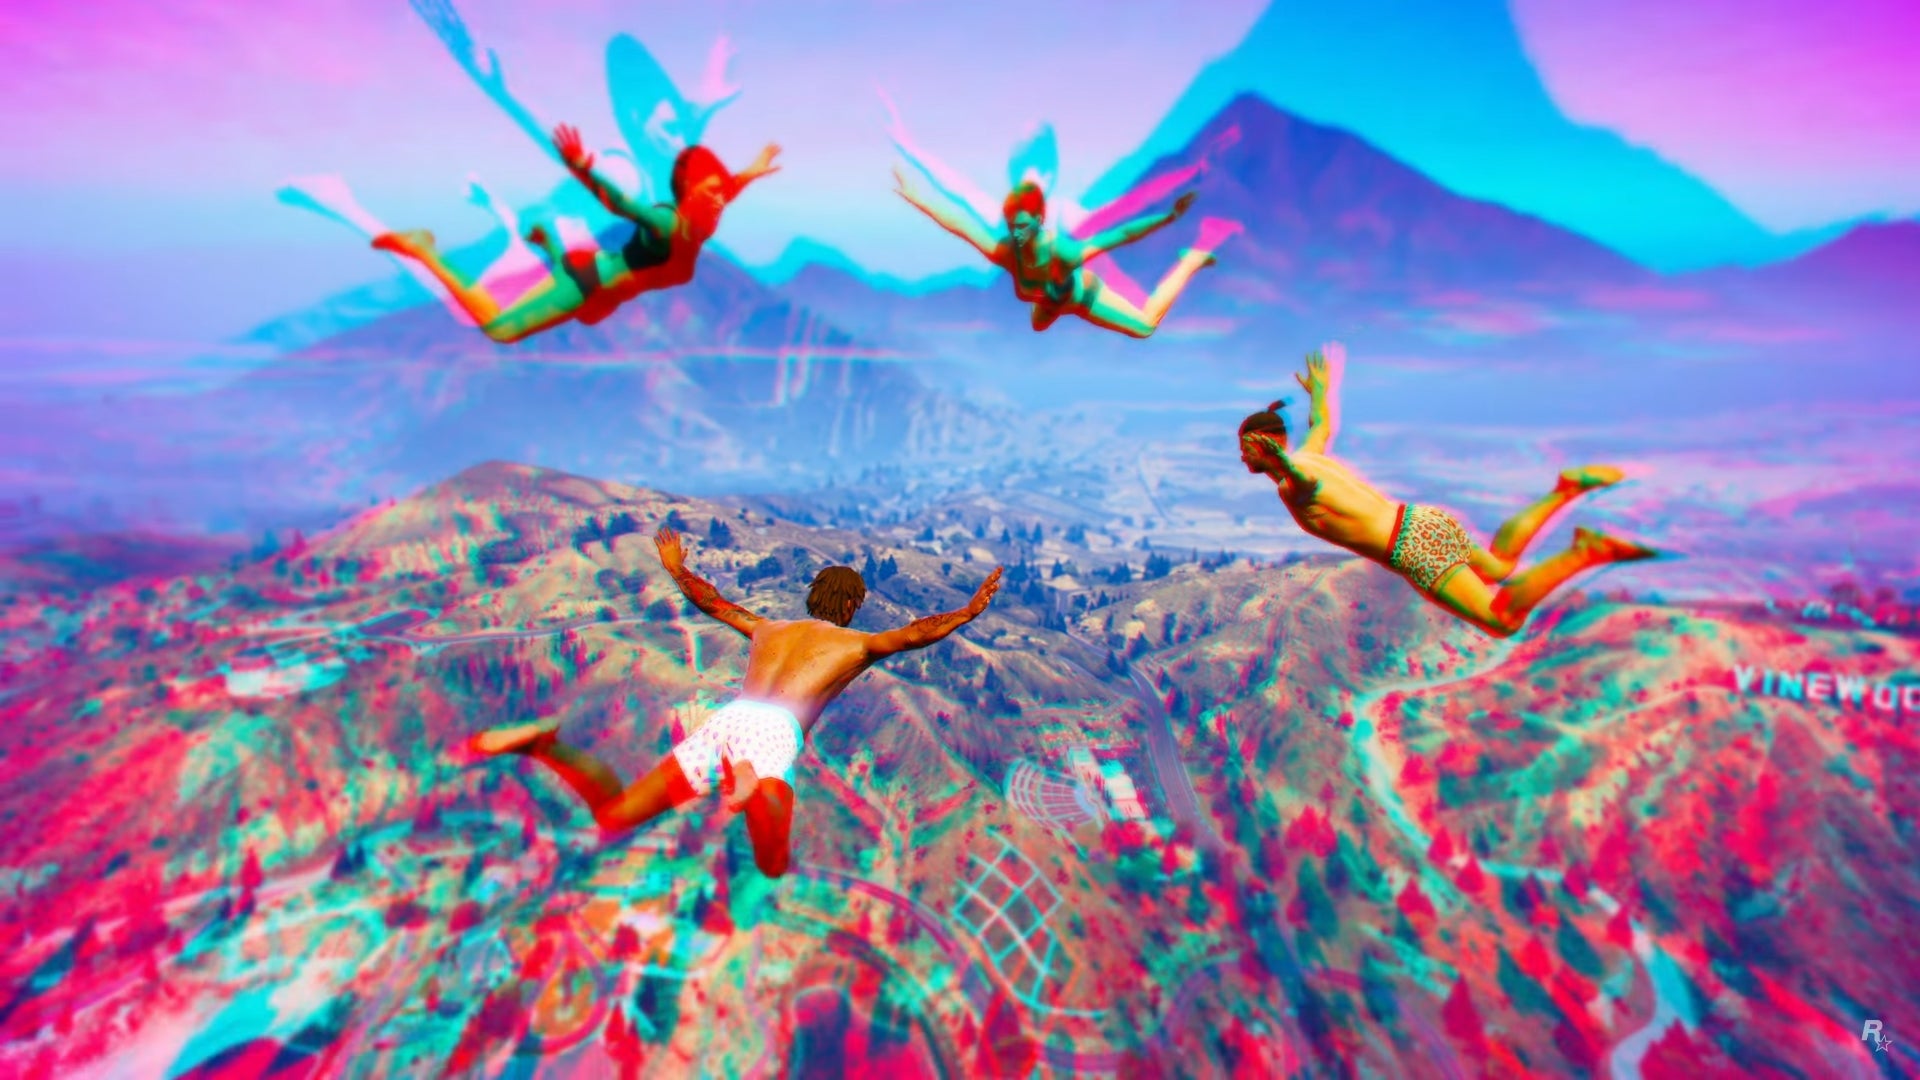 Four scantily clad people fall from the sky, as seen through a trippy purple filter